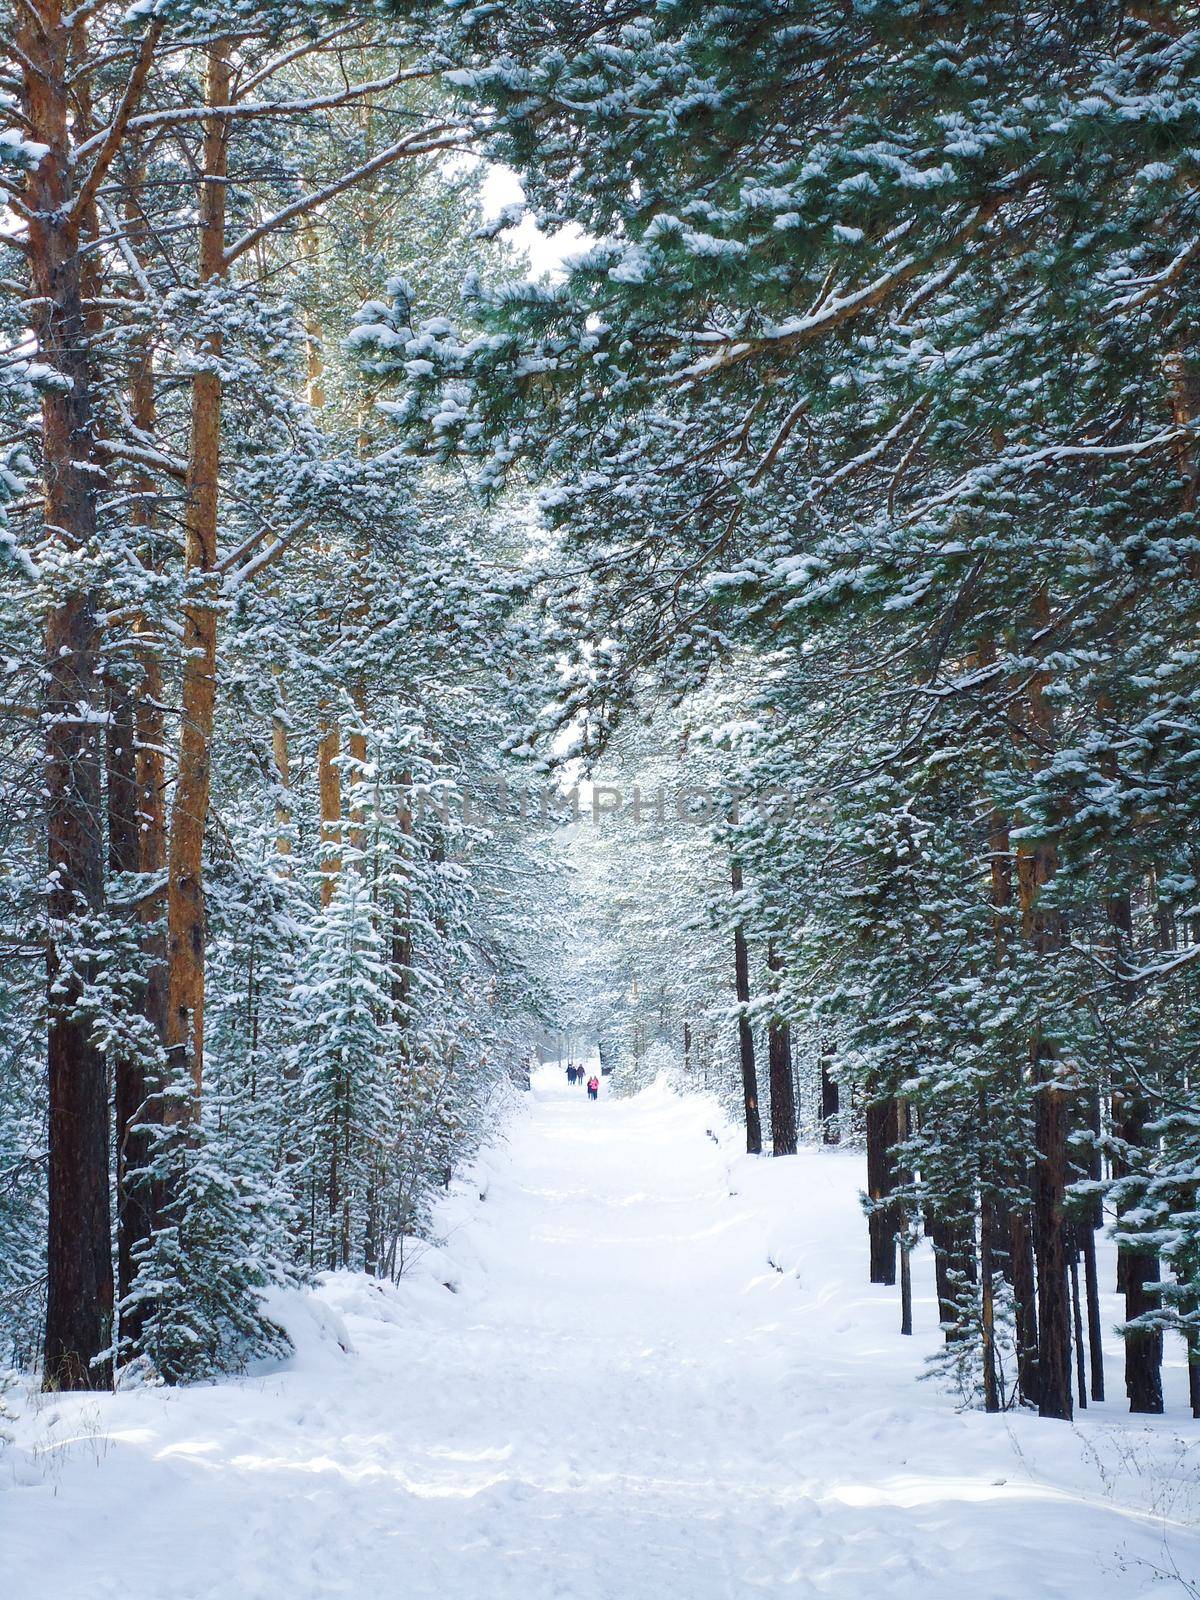 Fairy magic footpath in a snowy park with tall frozen evergreen trees of pine. Holiday walk hiking. Winter christmas landscape.